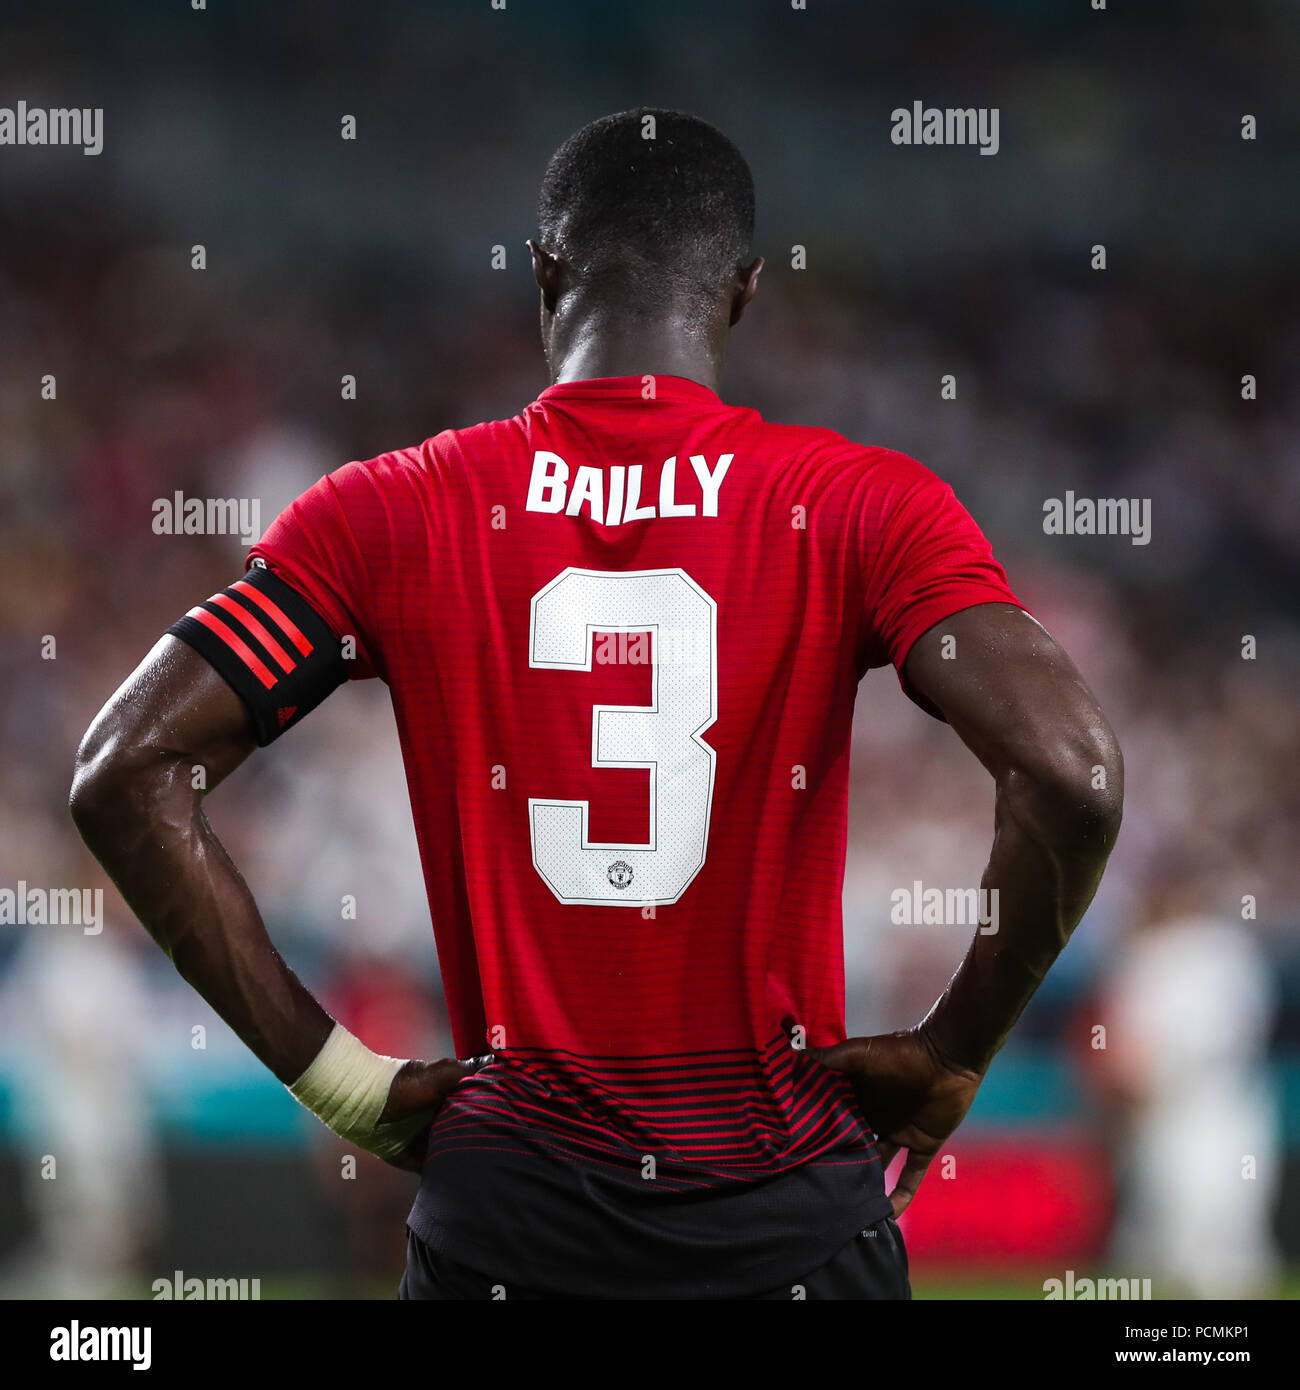 bailly jersey number